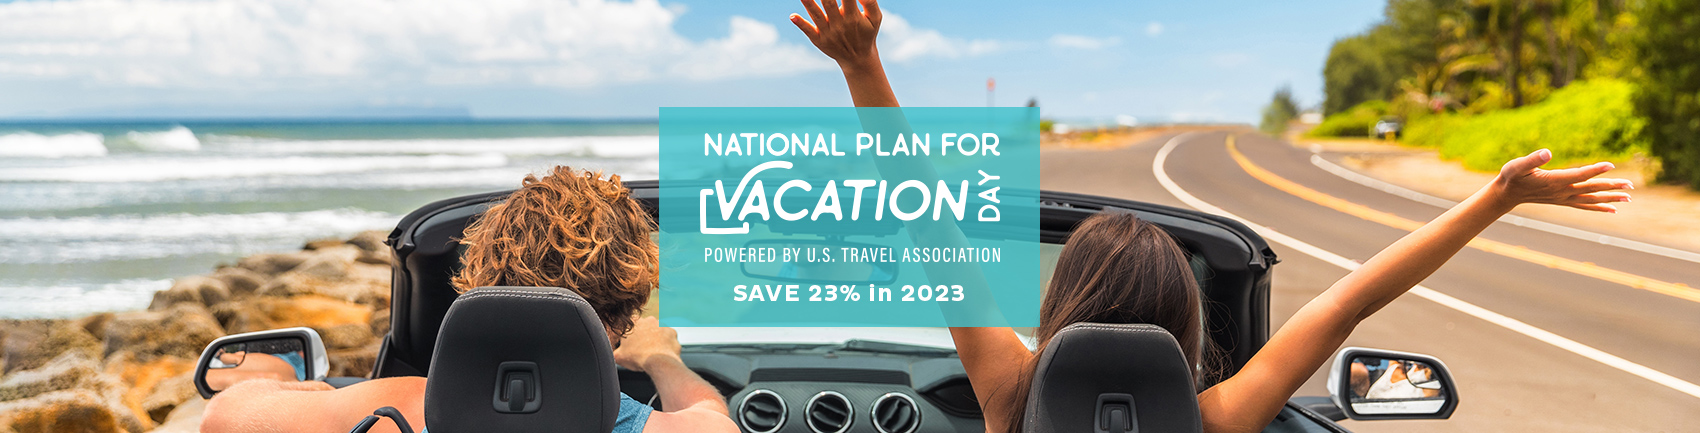 National Plan for Vacation Day. Powered by U.S. Travel Association. 